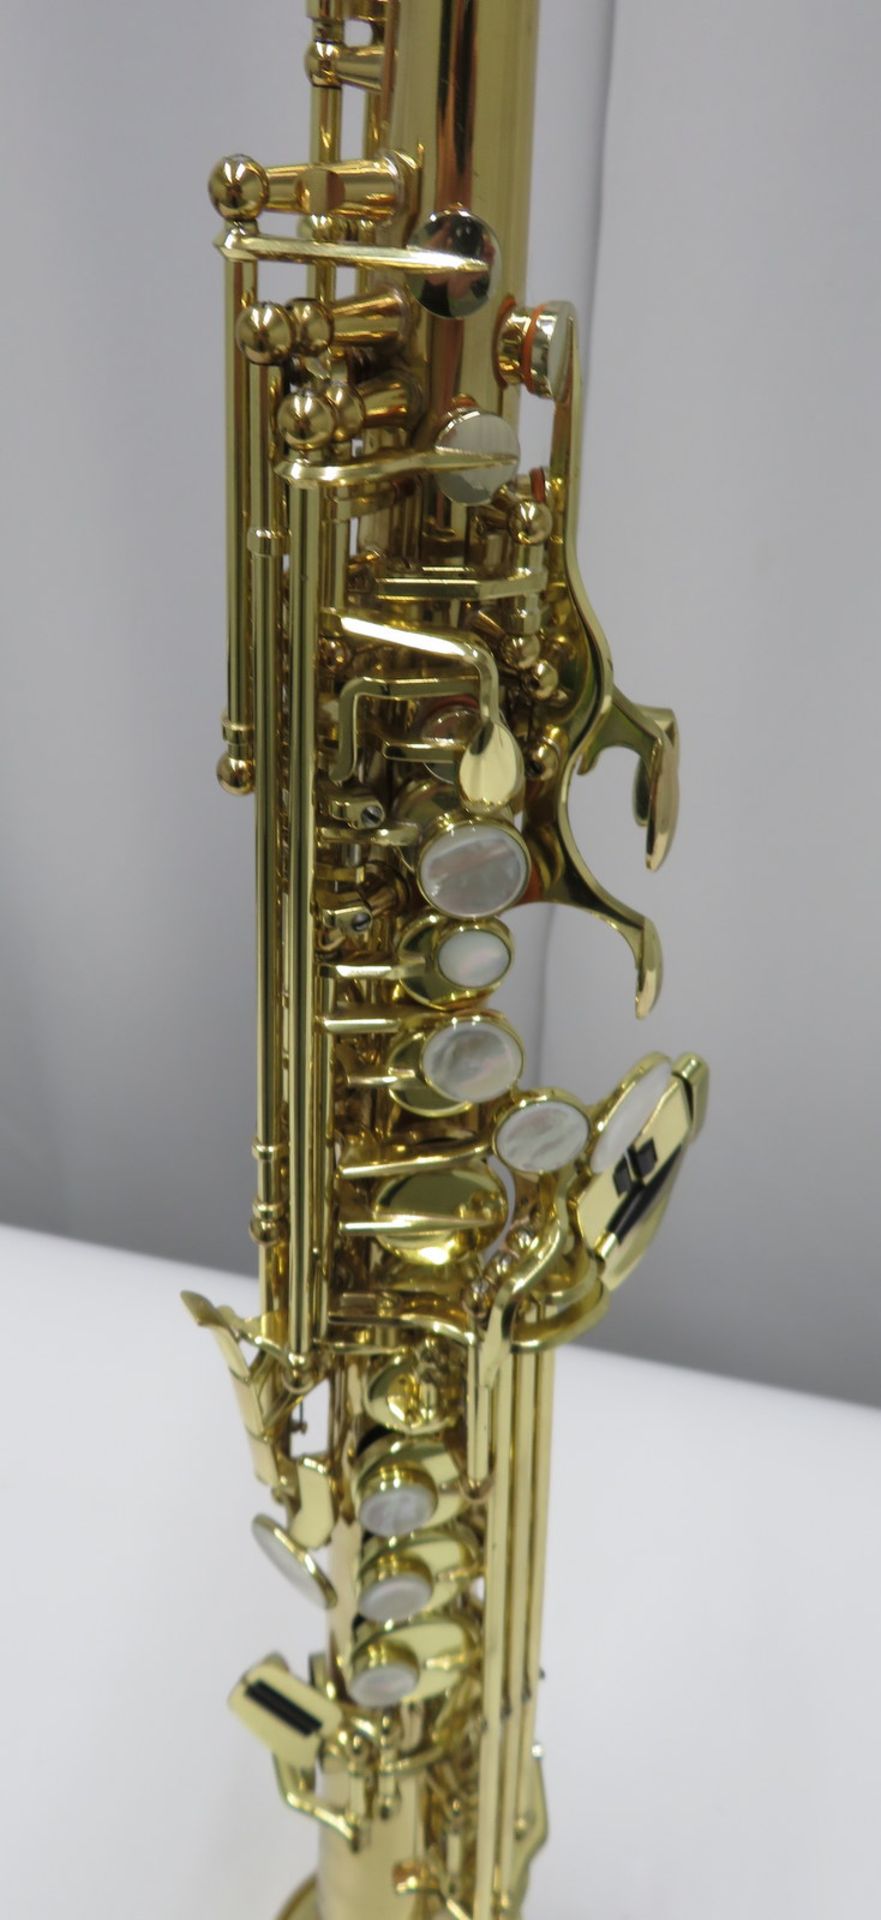 Henri Selmer 80 super action series 2 soprano saxophone with case. Serial number: N.530523. - Image 10 of 14